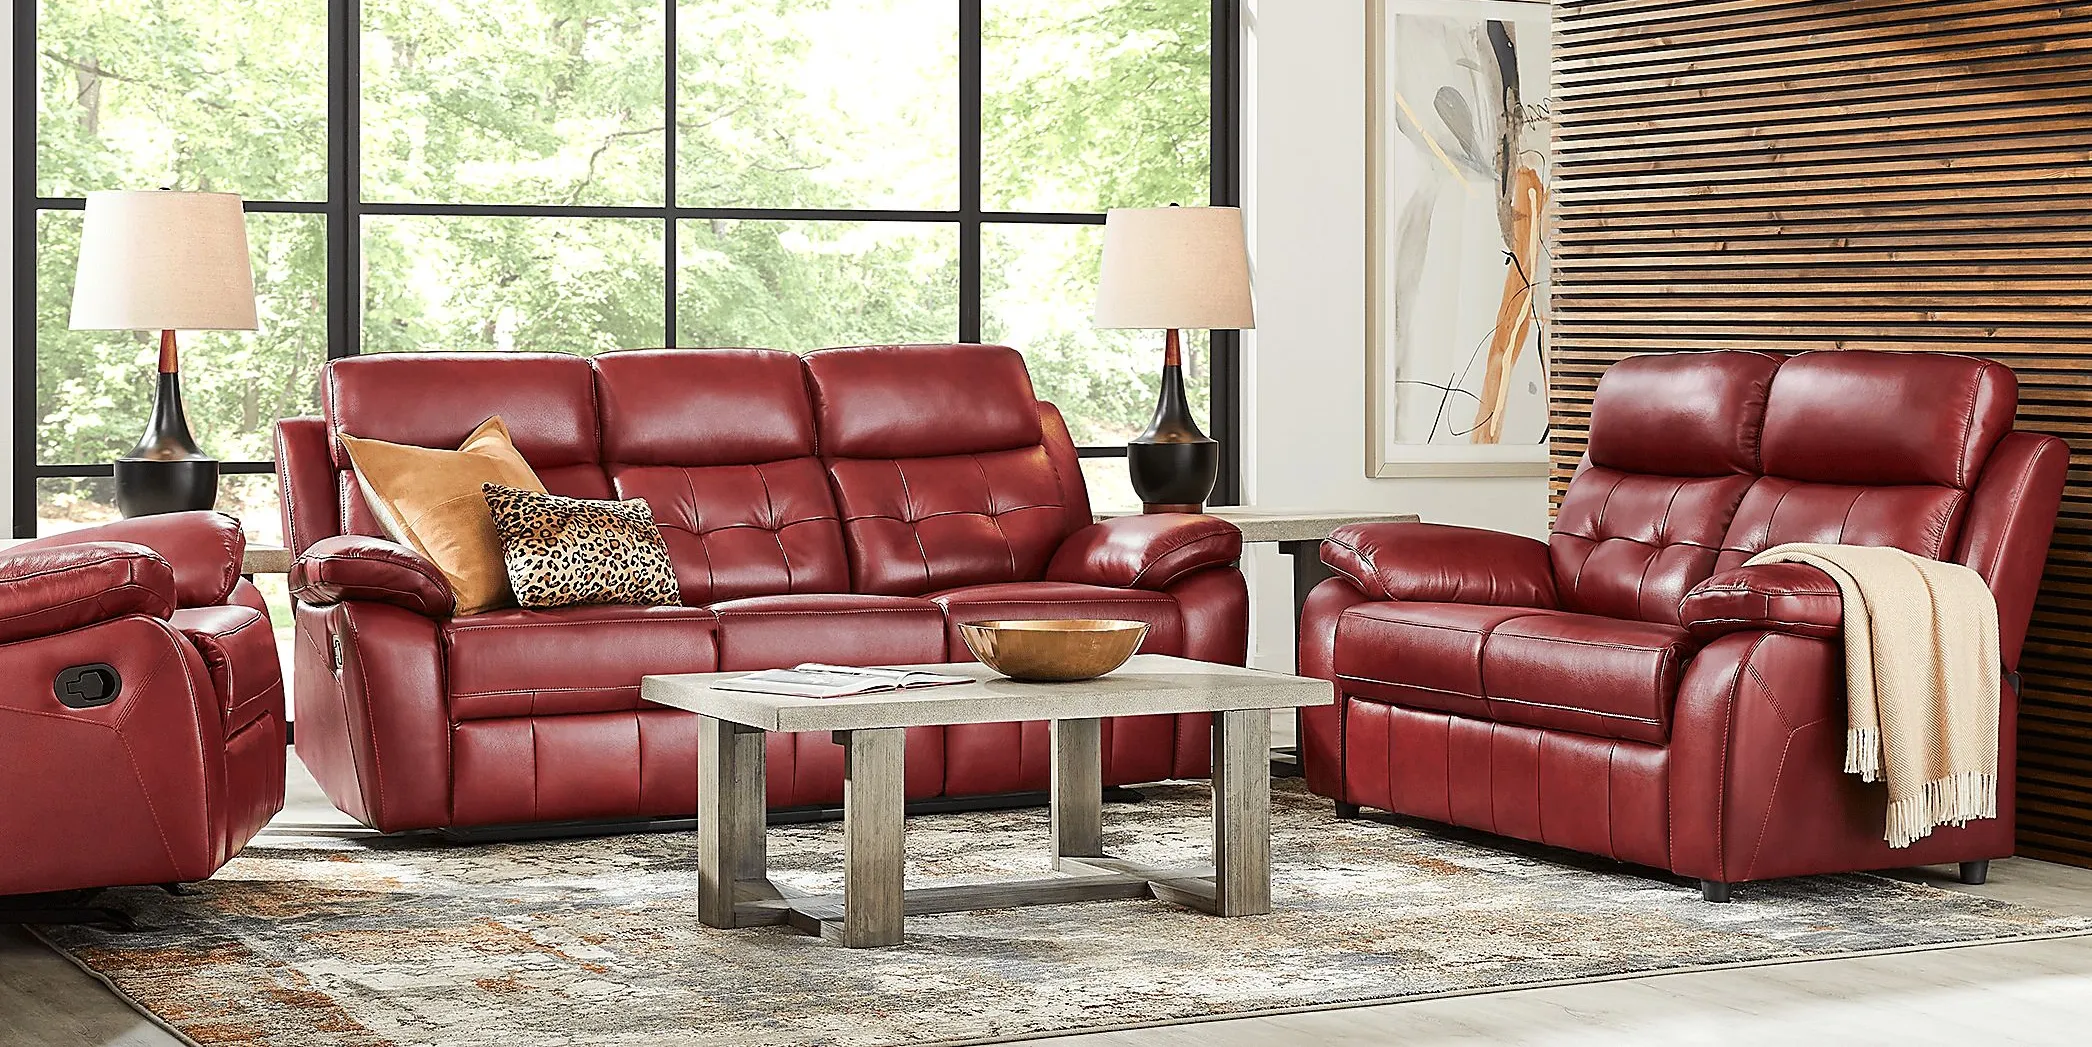 Antonin Red Leather 5 Pc Living Room with Reclining Sofa